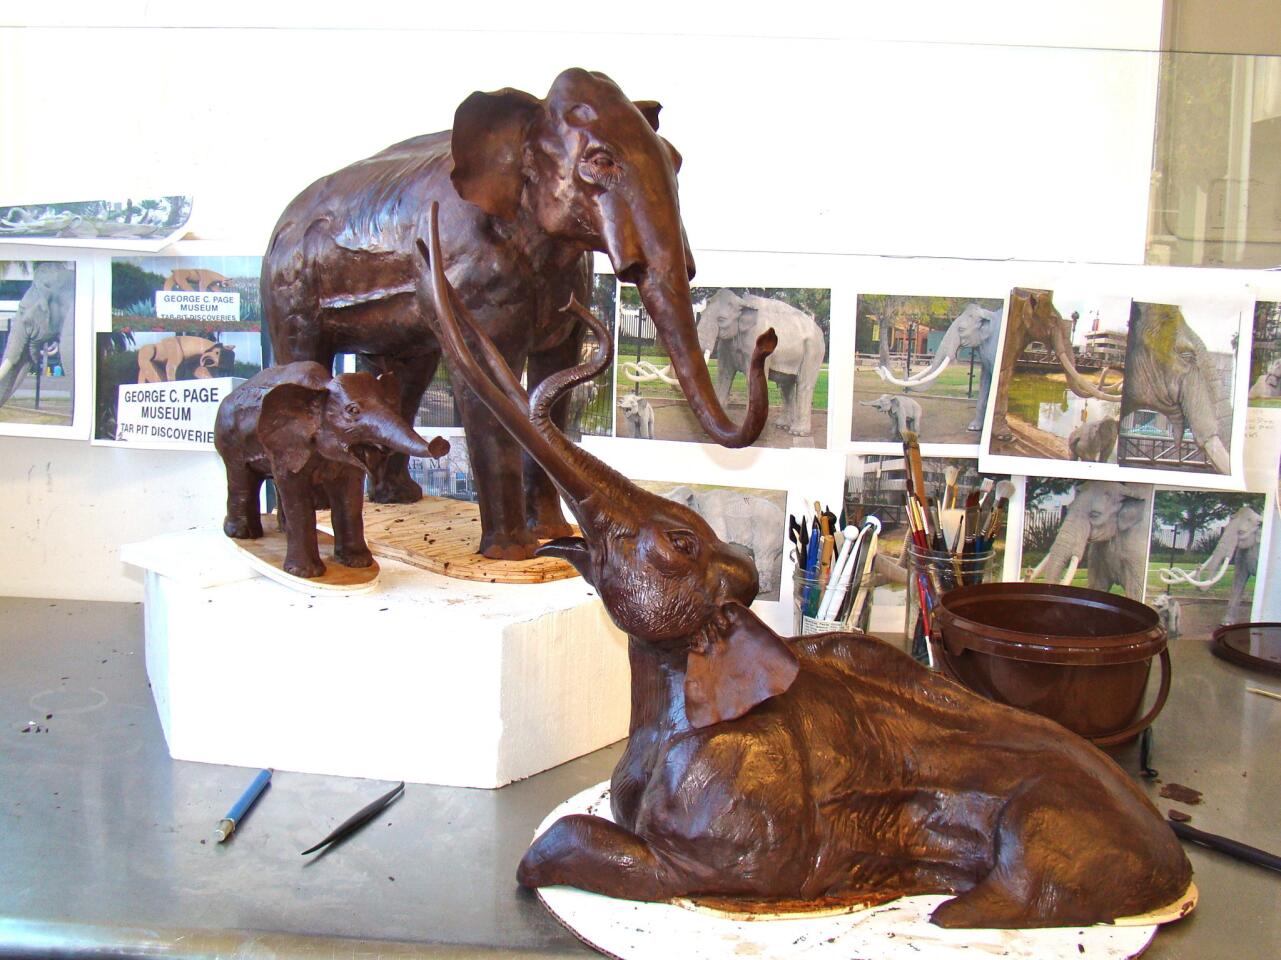 Kimberly Bailey of the Butter End in Santa Monica created the elephants at the La Brea Tar Pits from chocolate.